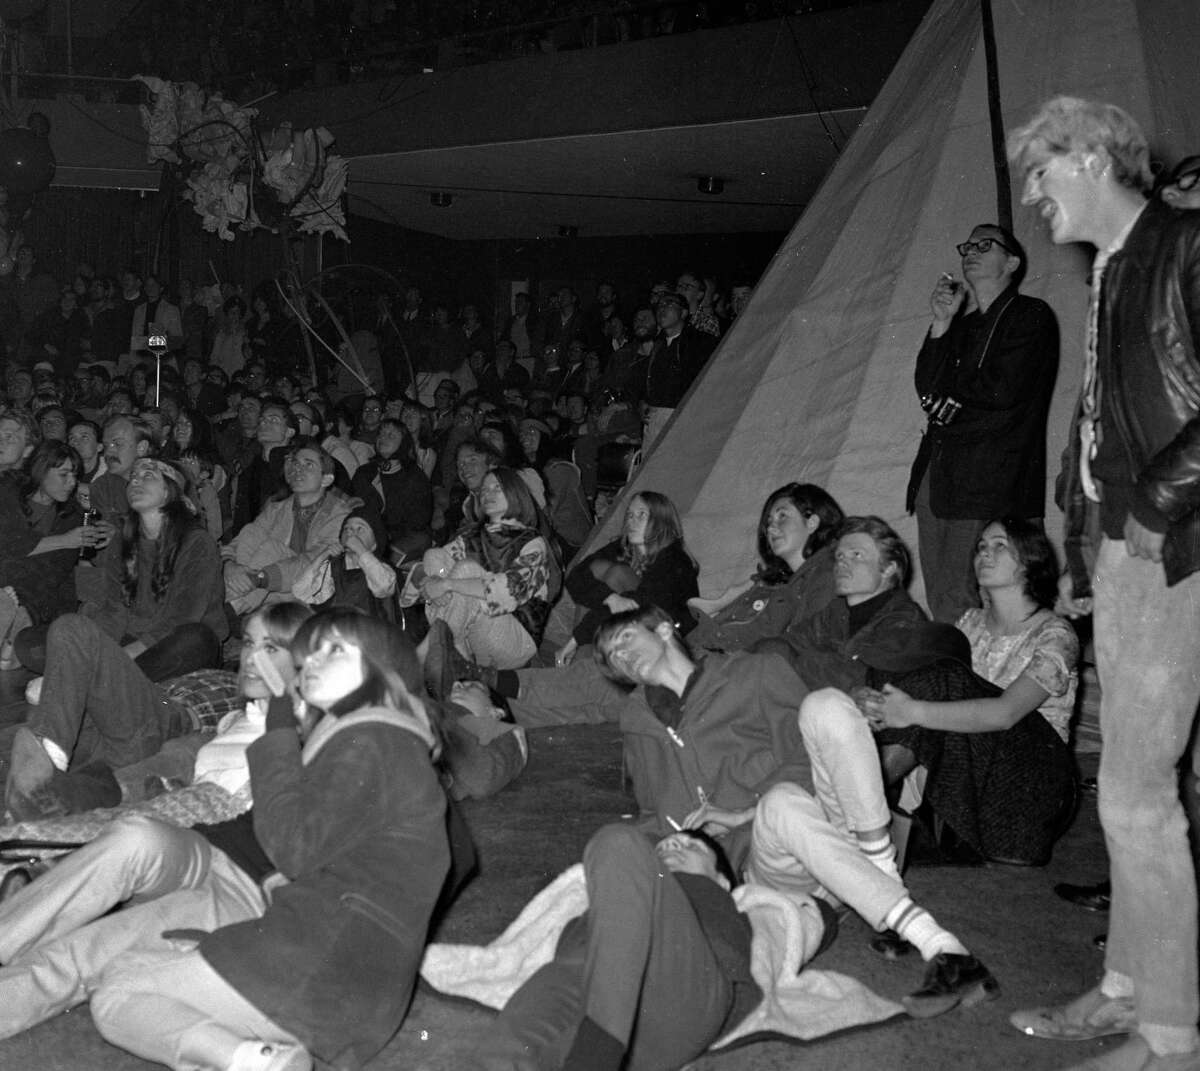 The Trips Festival Acid Test at Longshoreman's Hall, where the Grateful Dead performed.